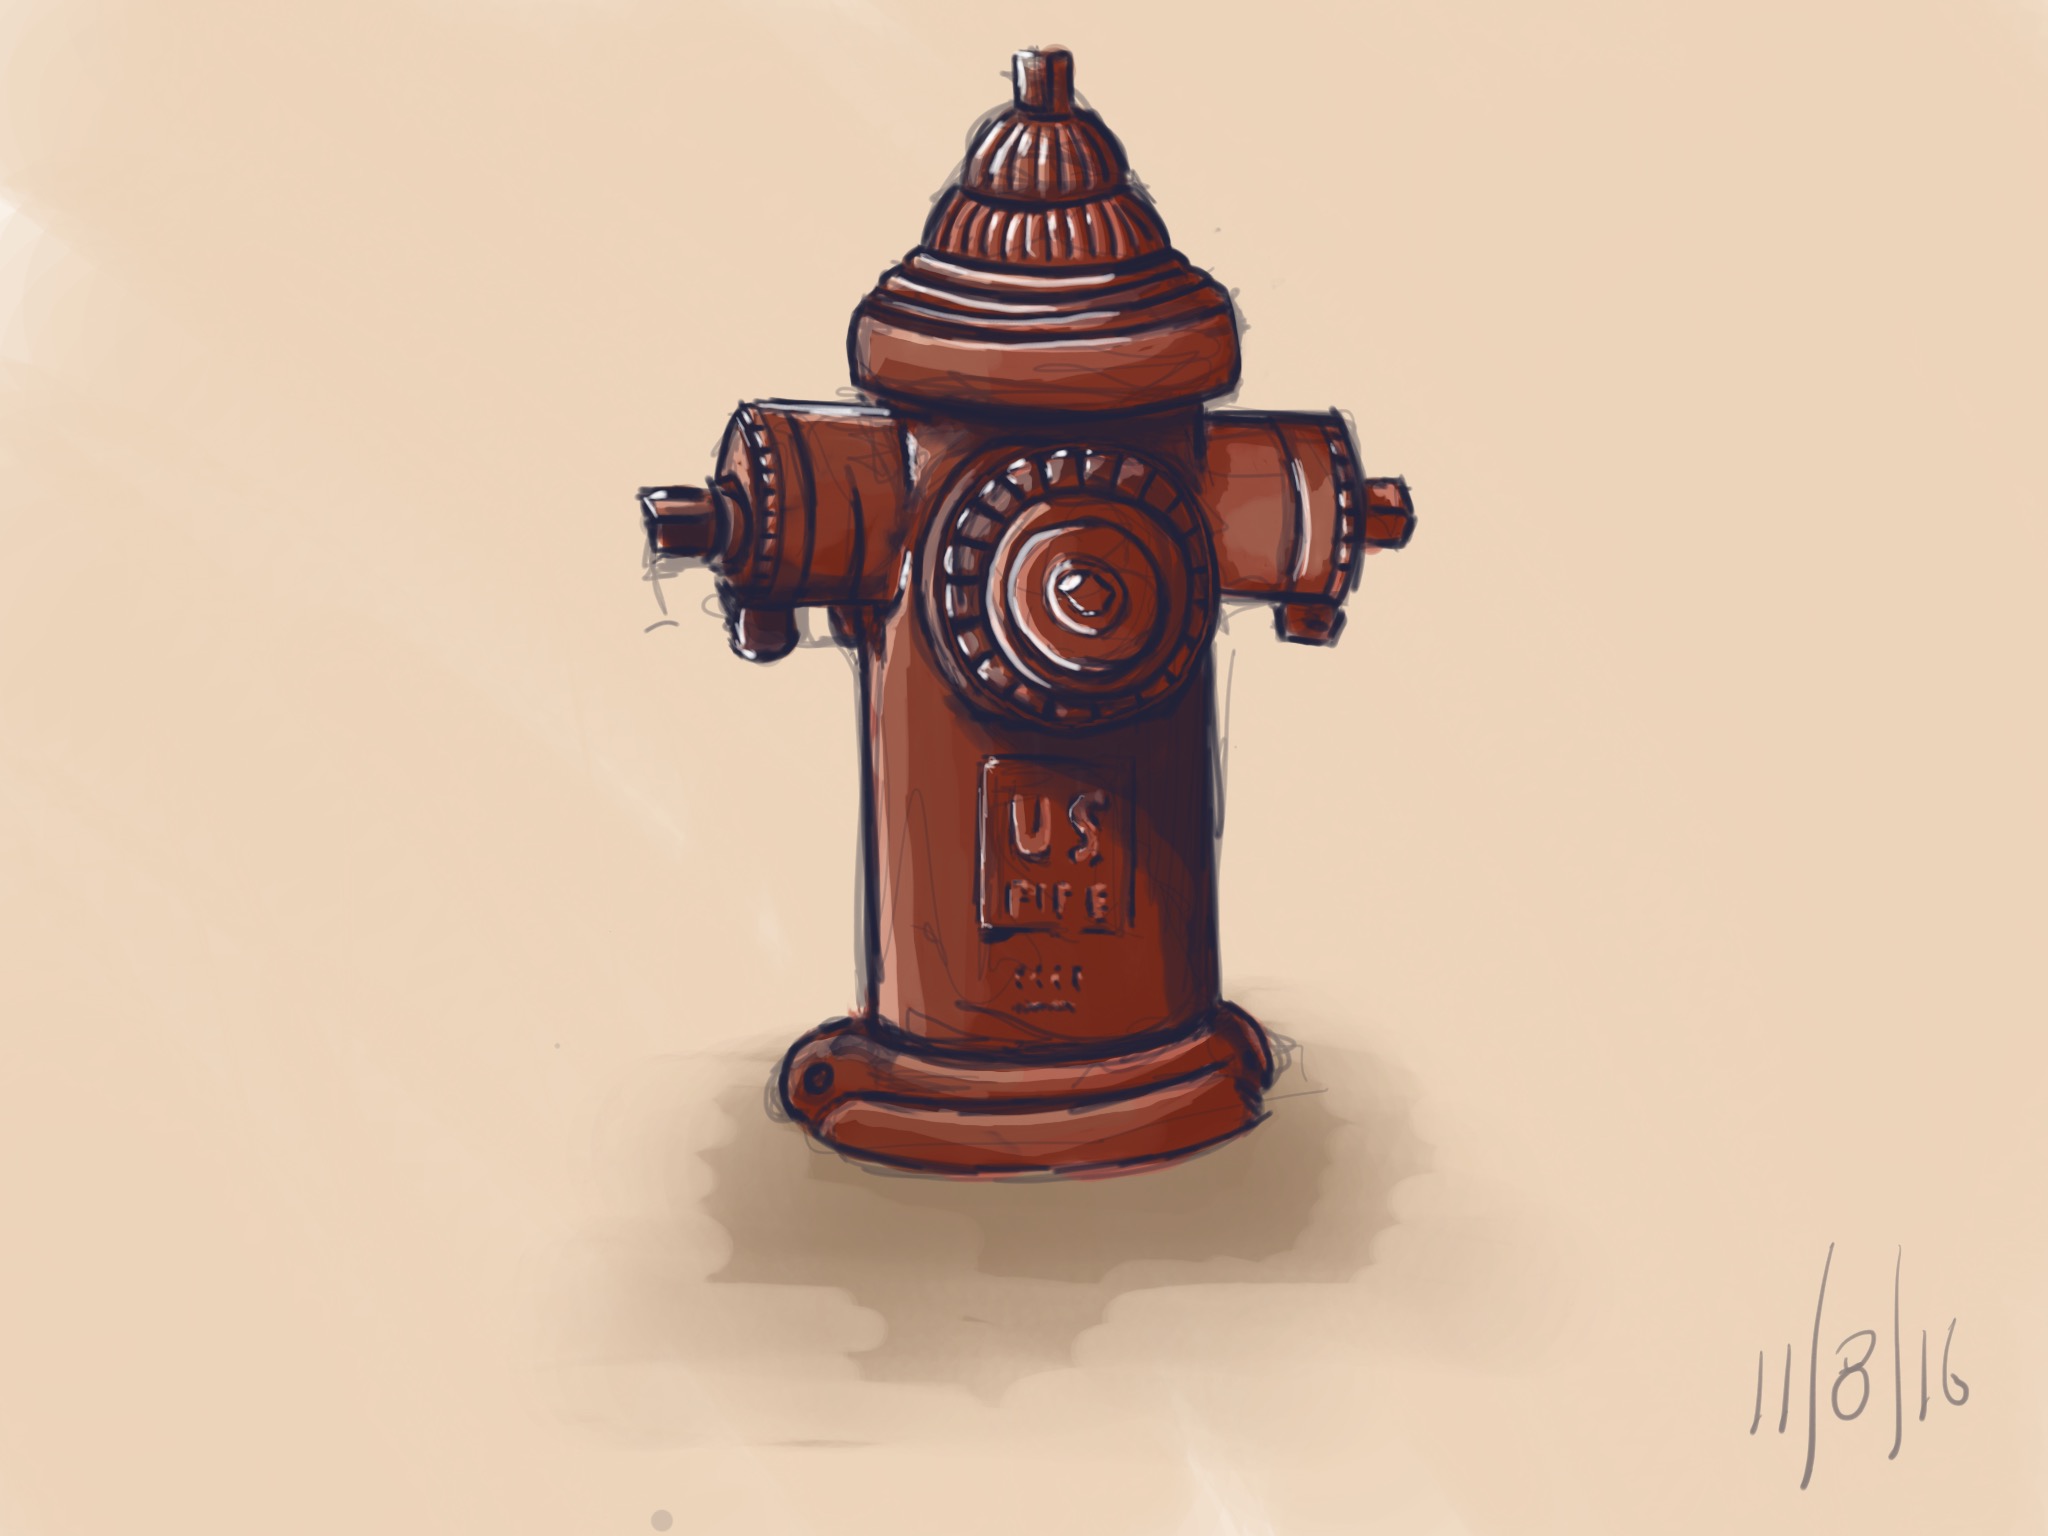 #gdpipeline daily challenge 11-8-16 "fire hydrant"